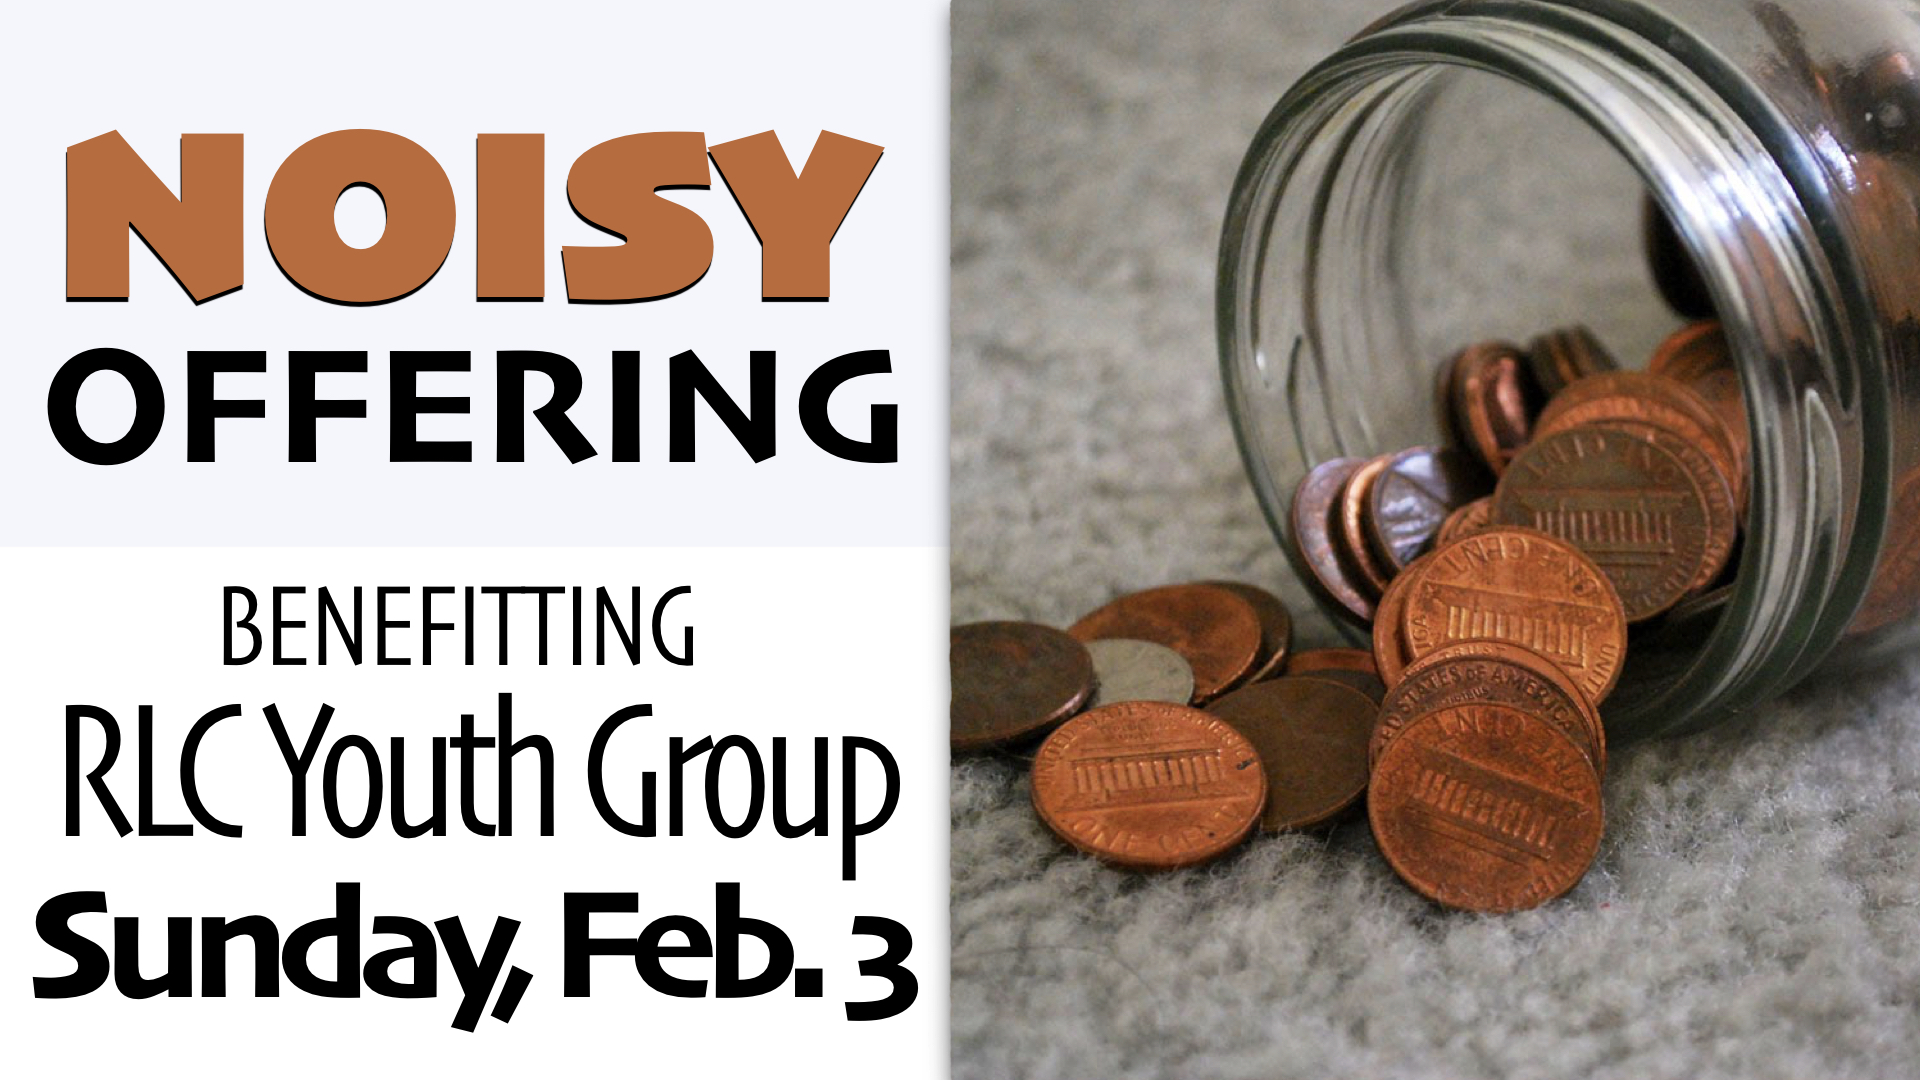 Noisy Offering Benefitting RLC Youth Group